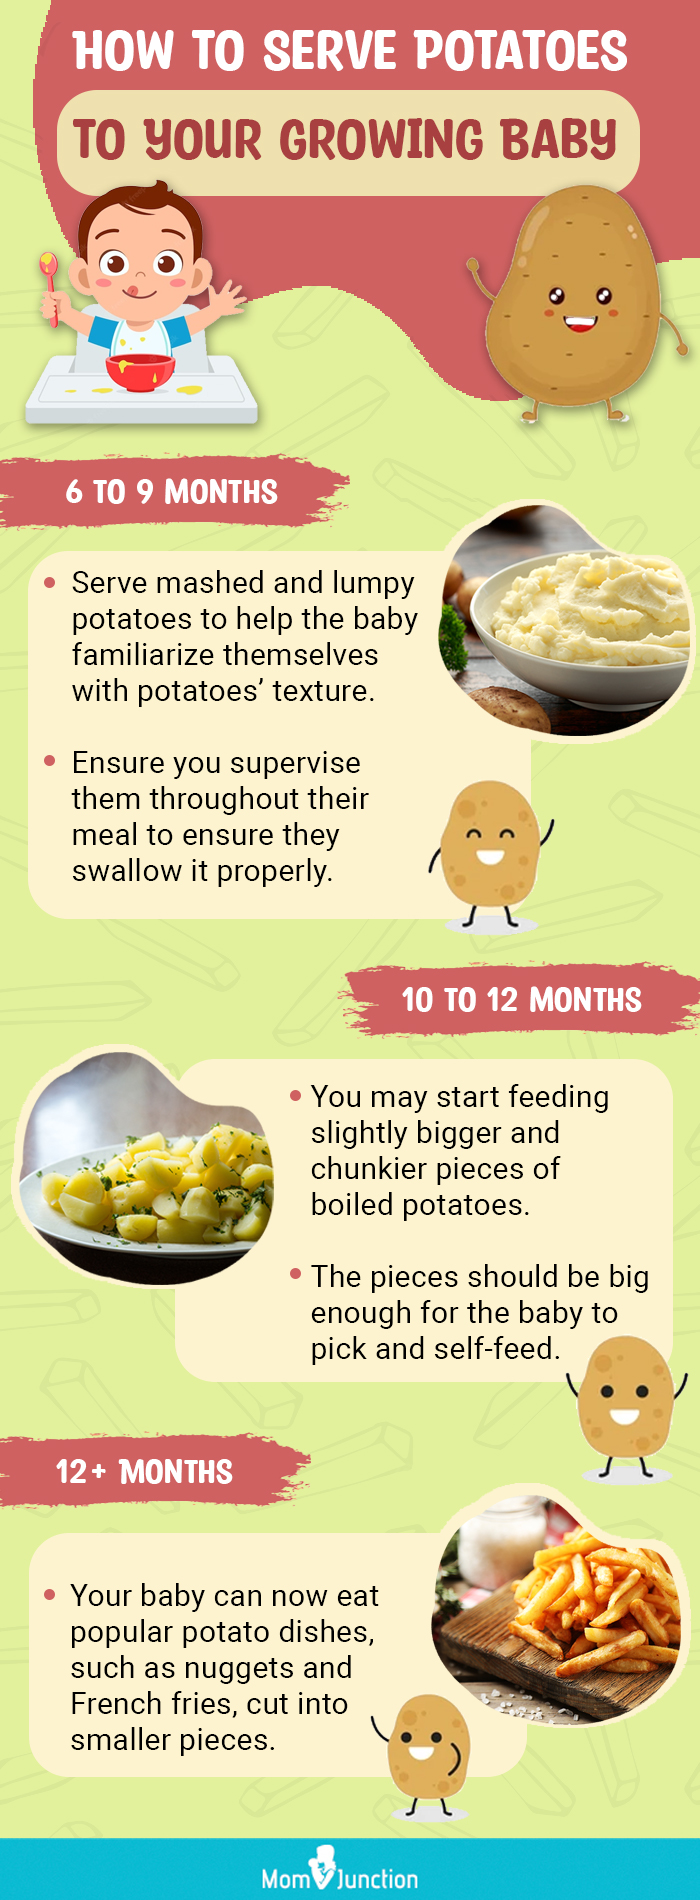 age wise potato serving tips for babies [infographic]